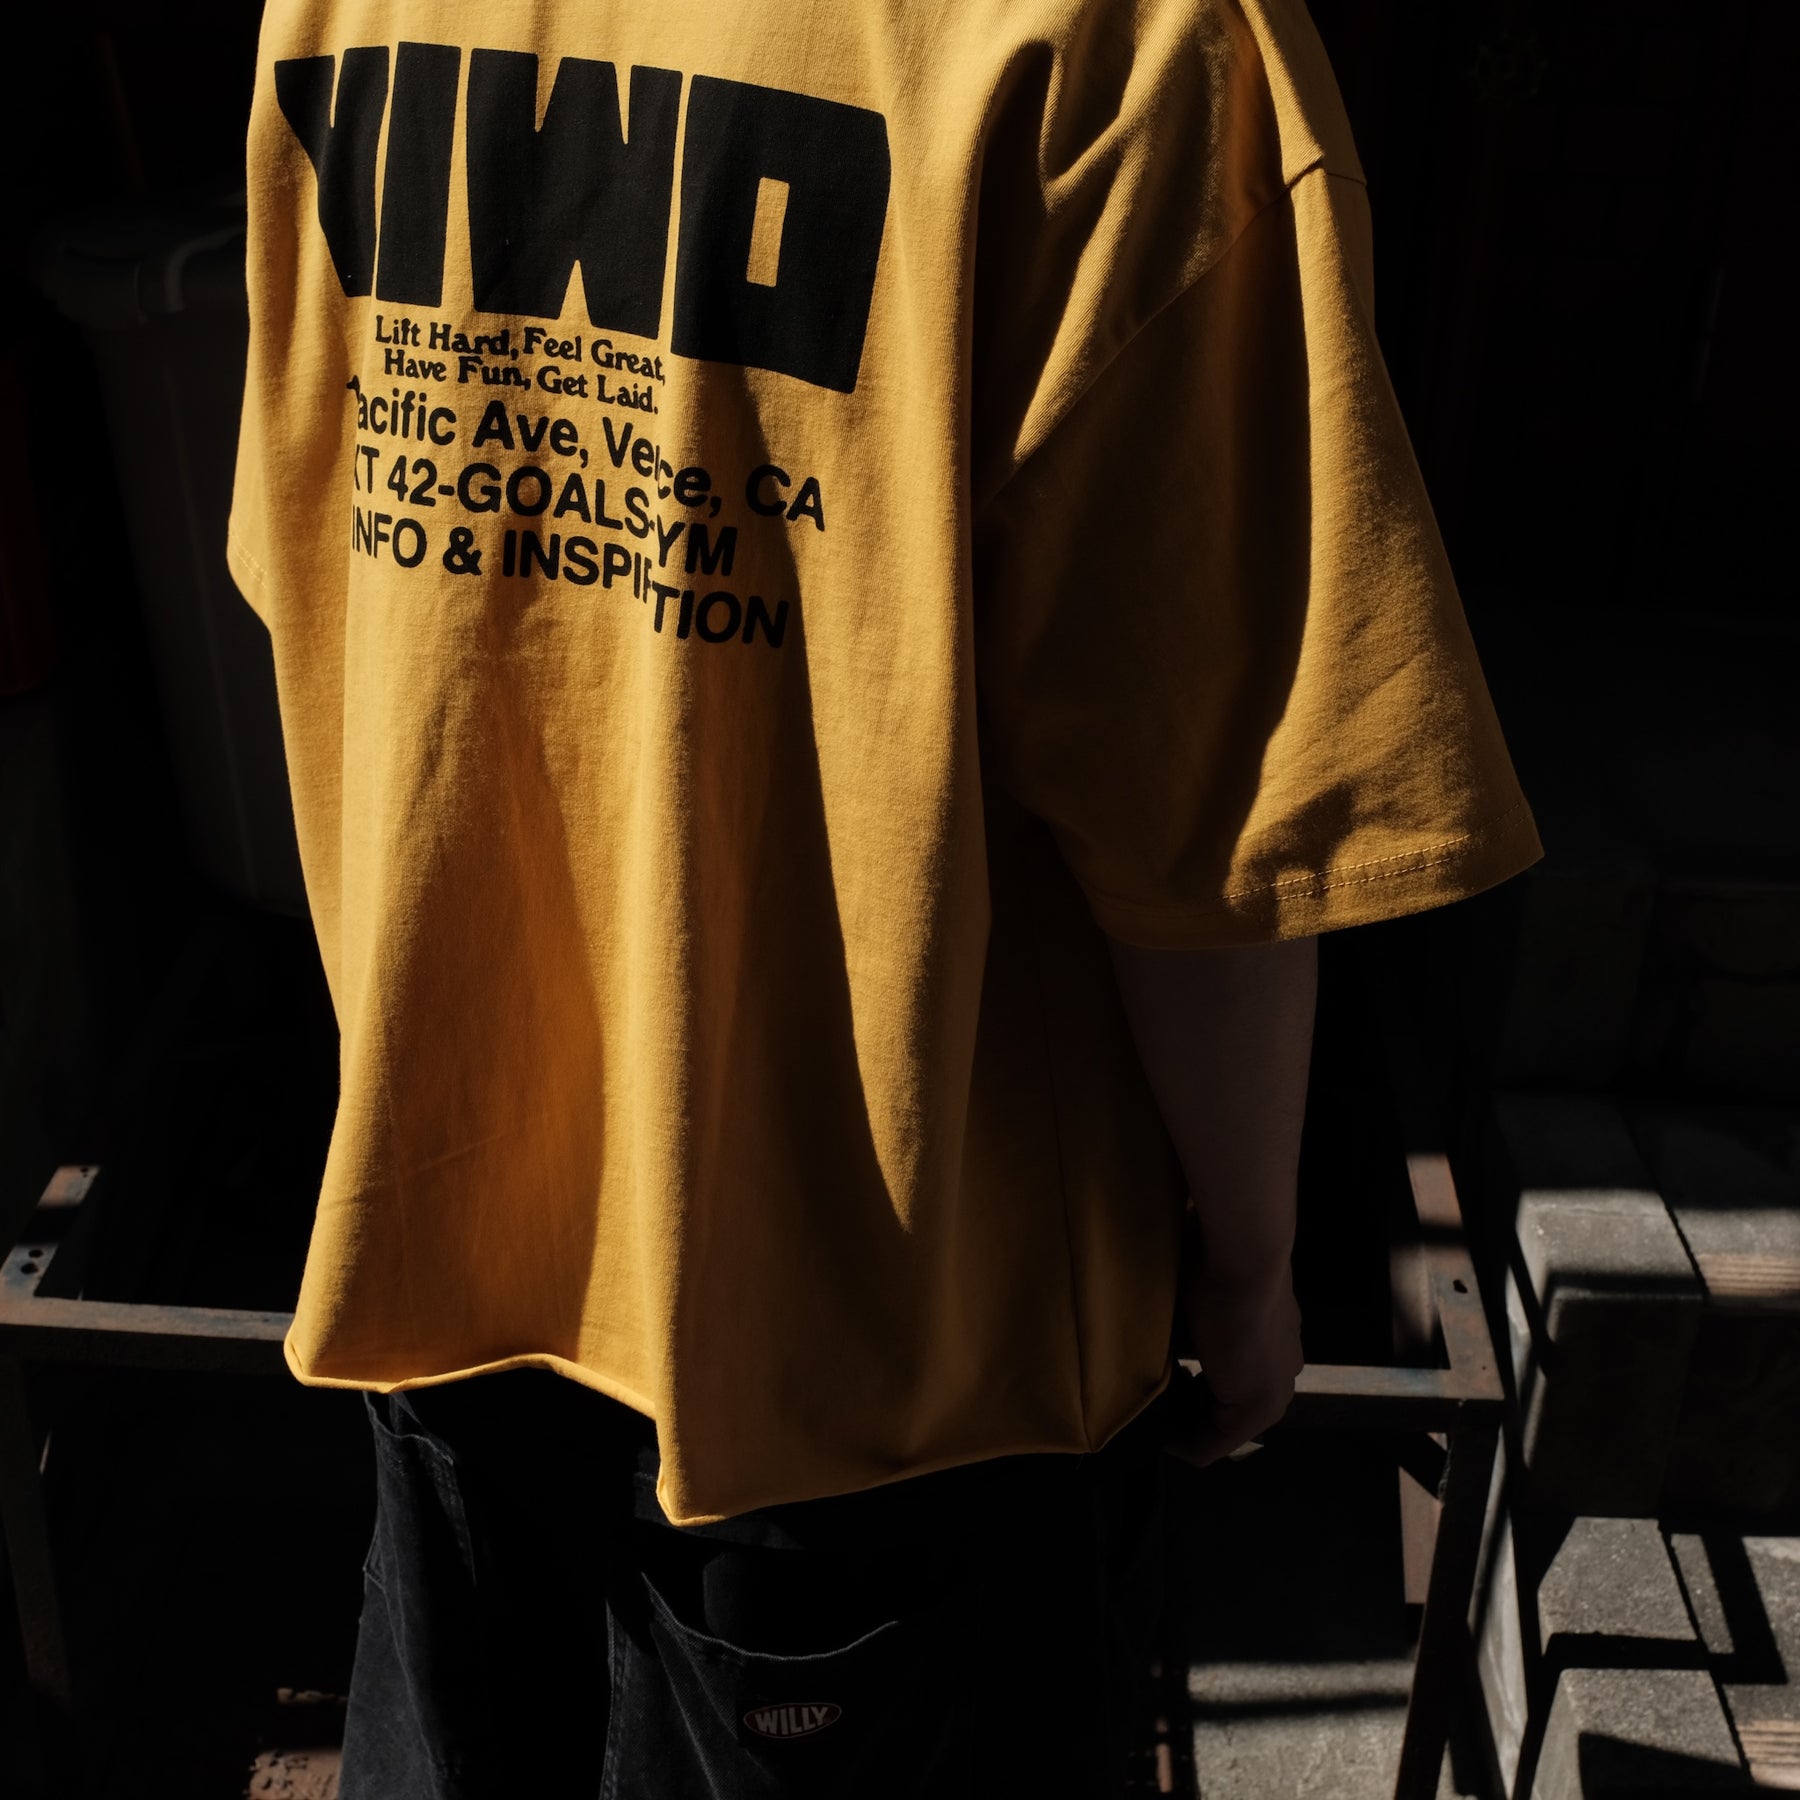 Y,IWO / Strong Cropped Tees Grizzly Yellow